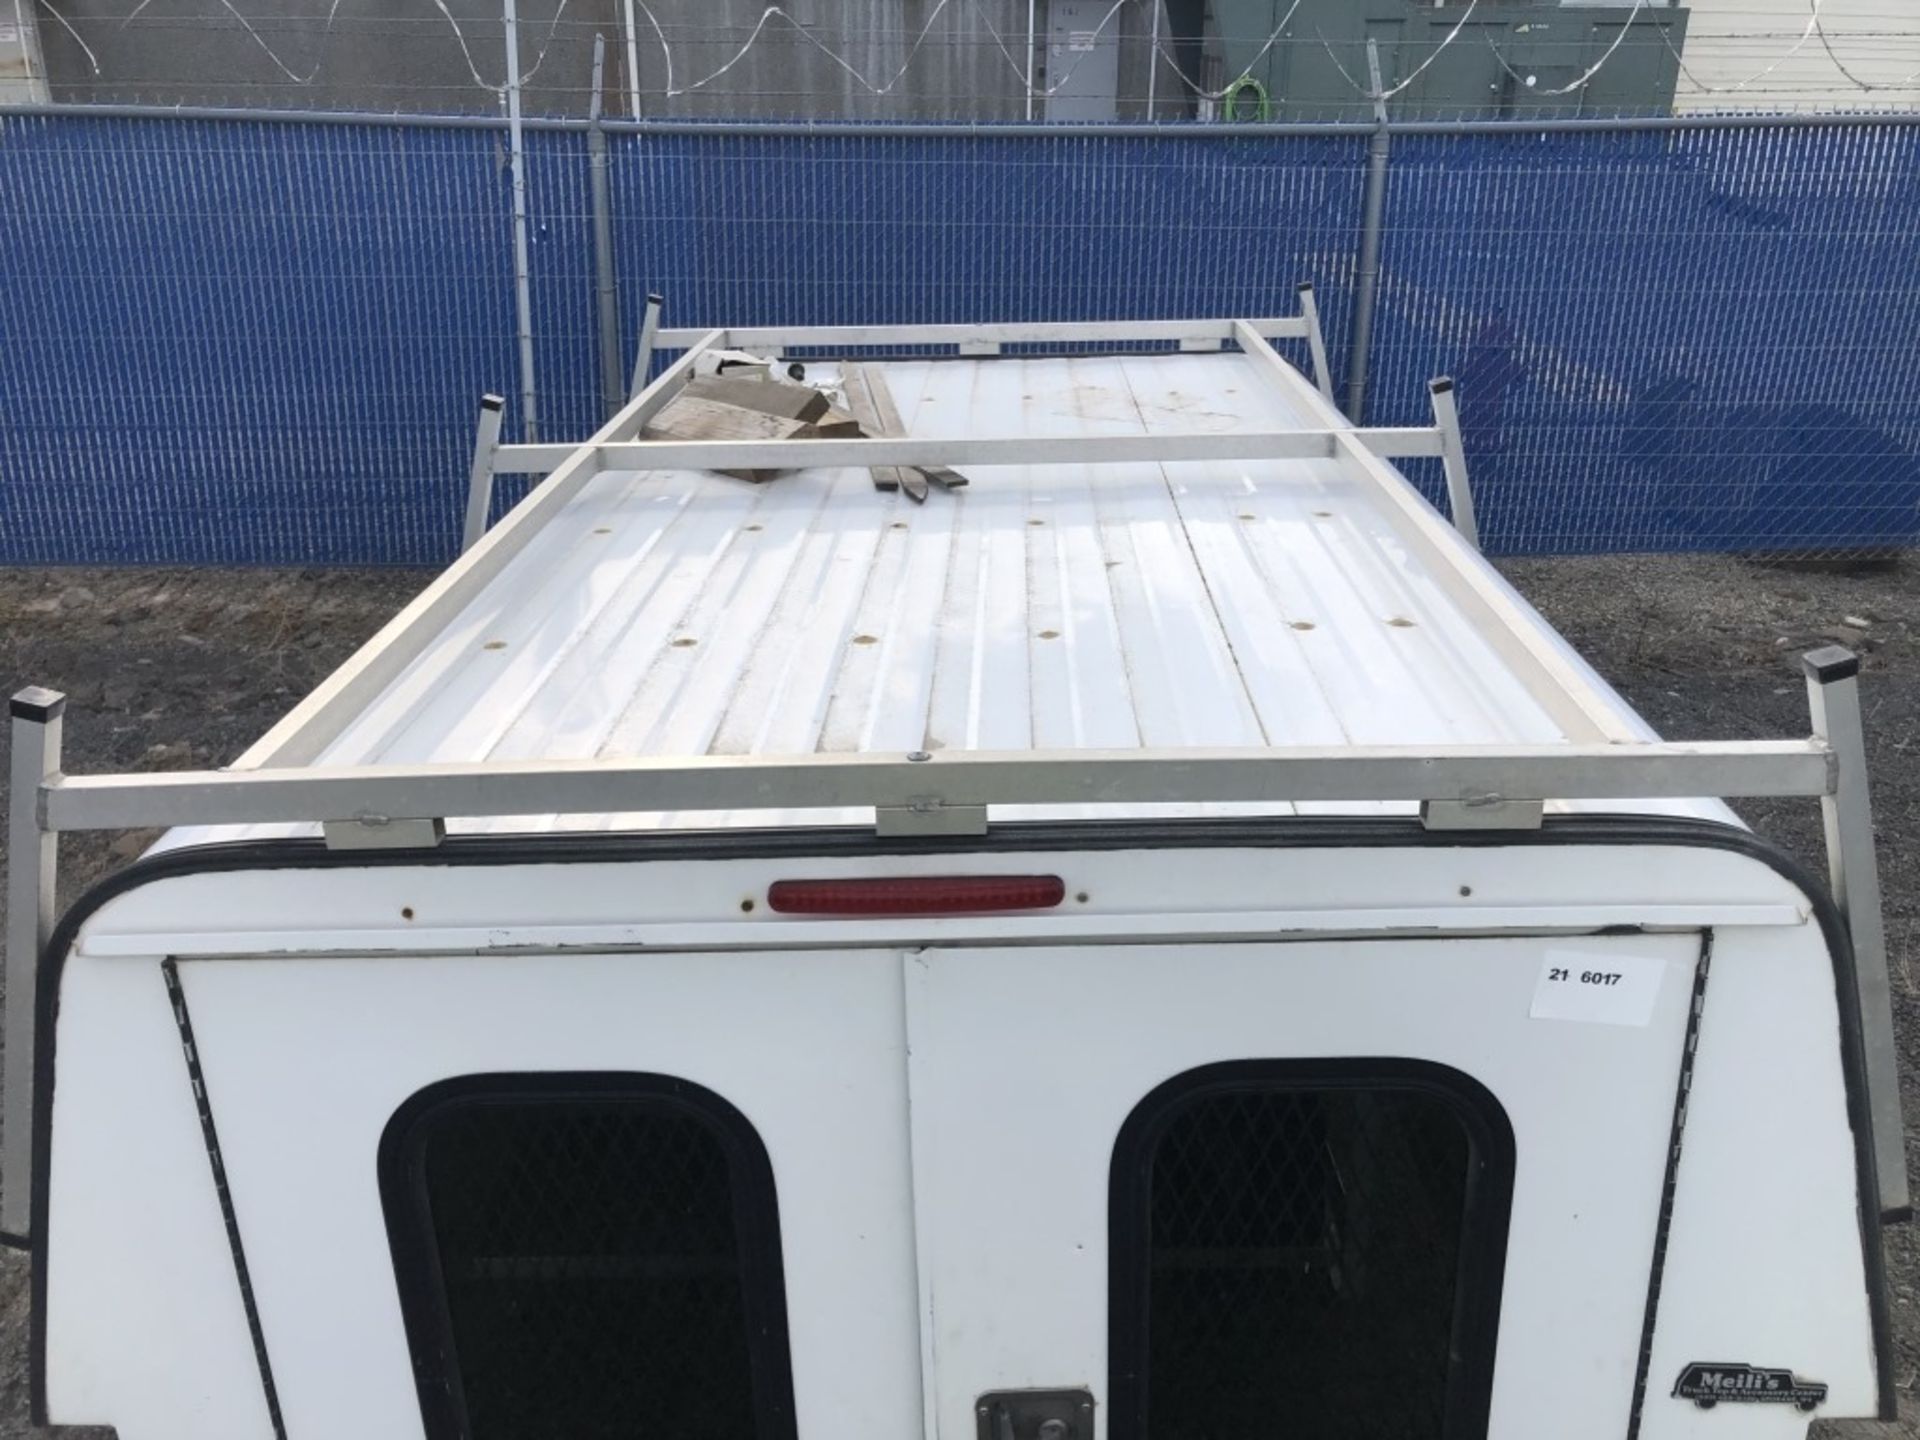 Meili's Contractor Truck Canopy - Image 2 of 9